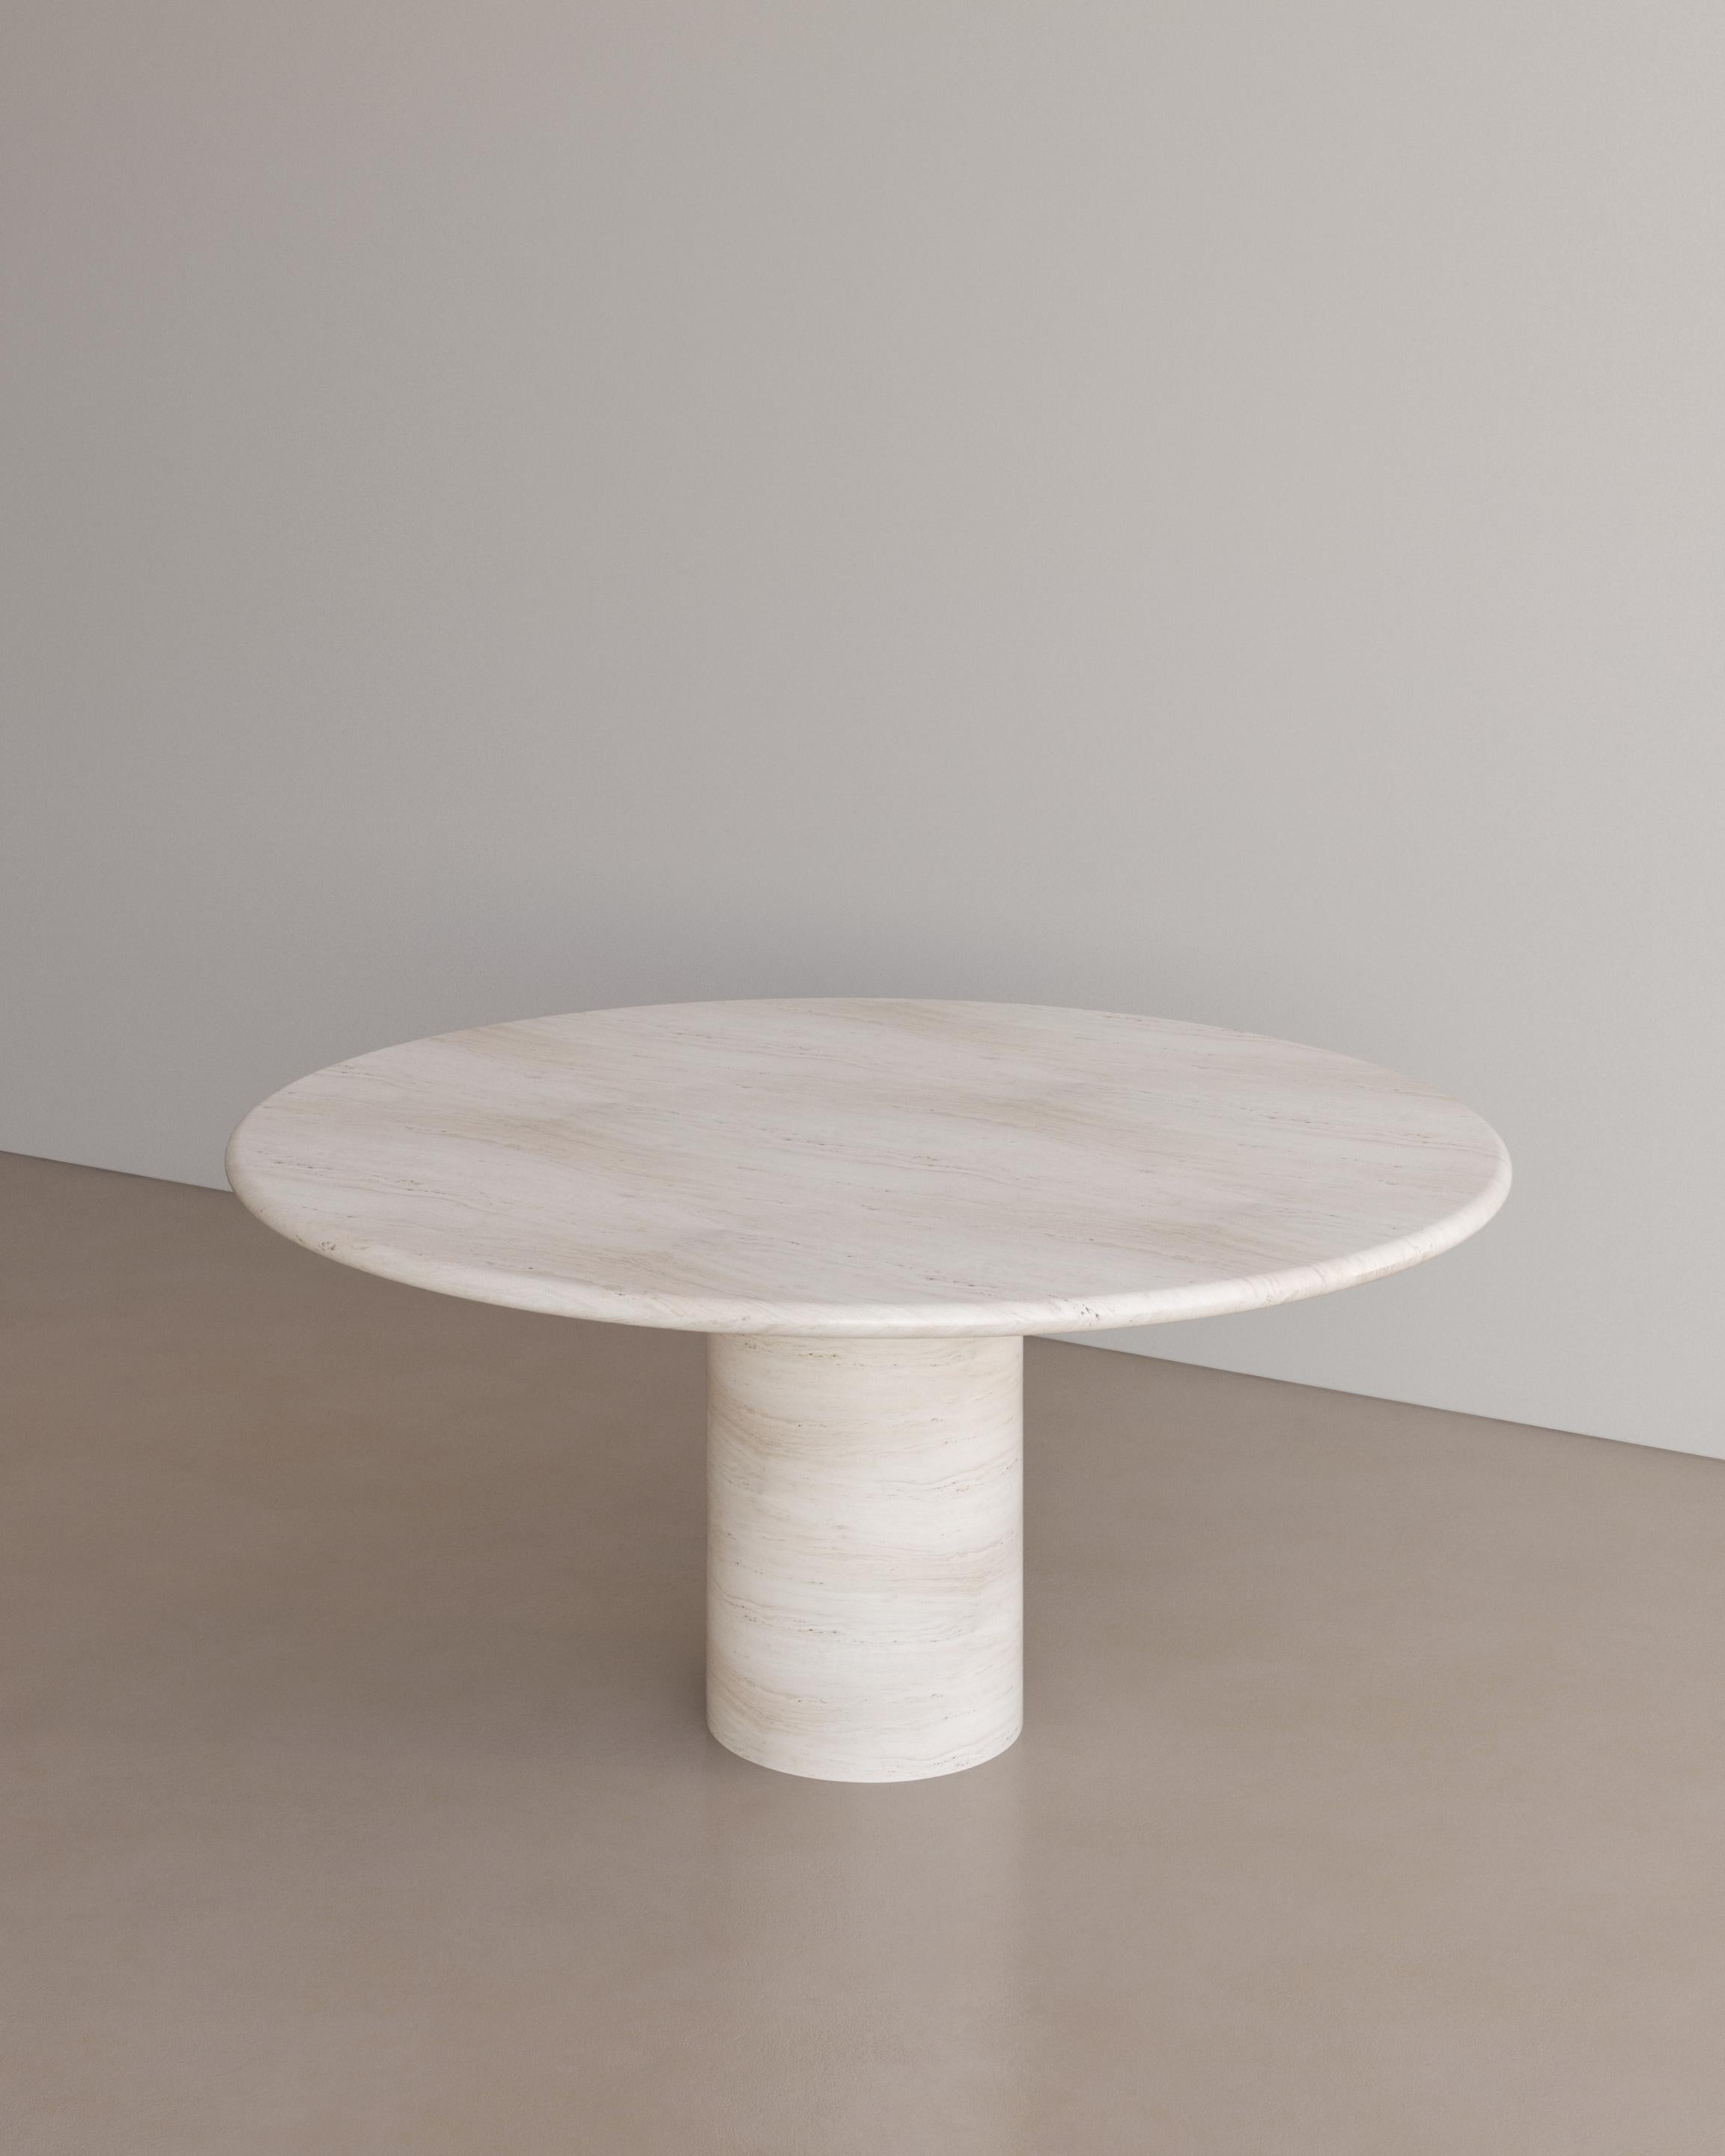 Australian Bianco Travertine Voyage Dining Table i by the Essentialist For Sale